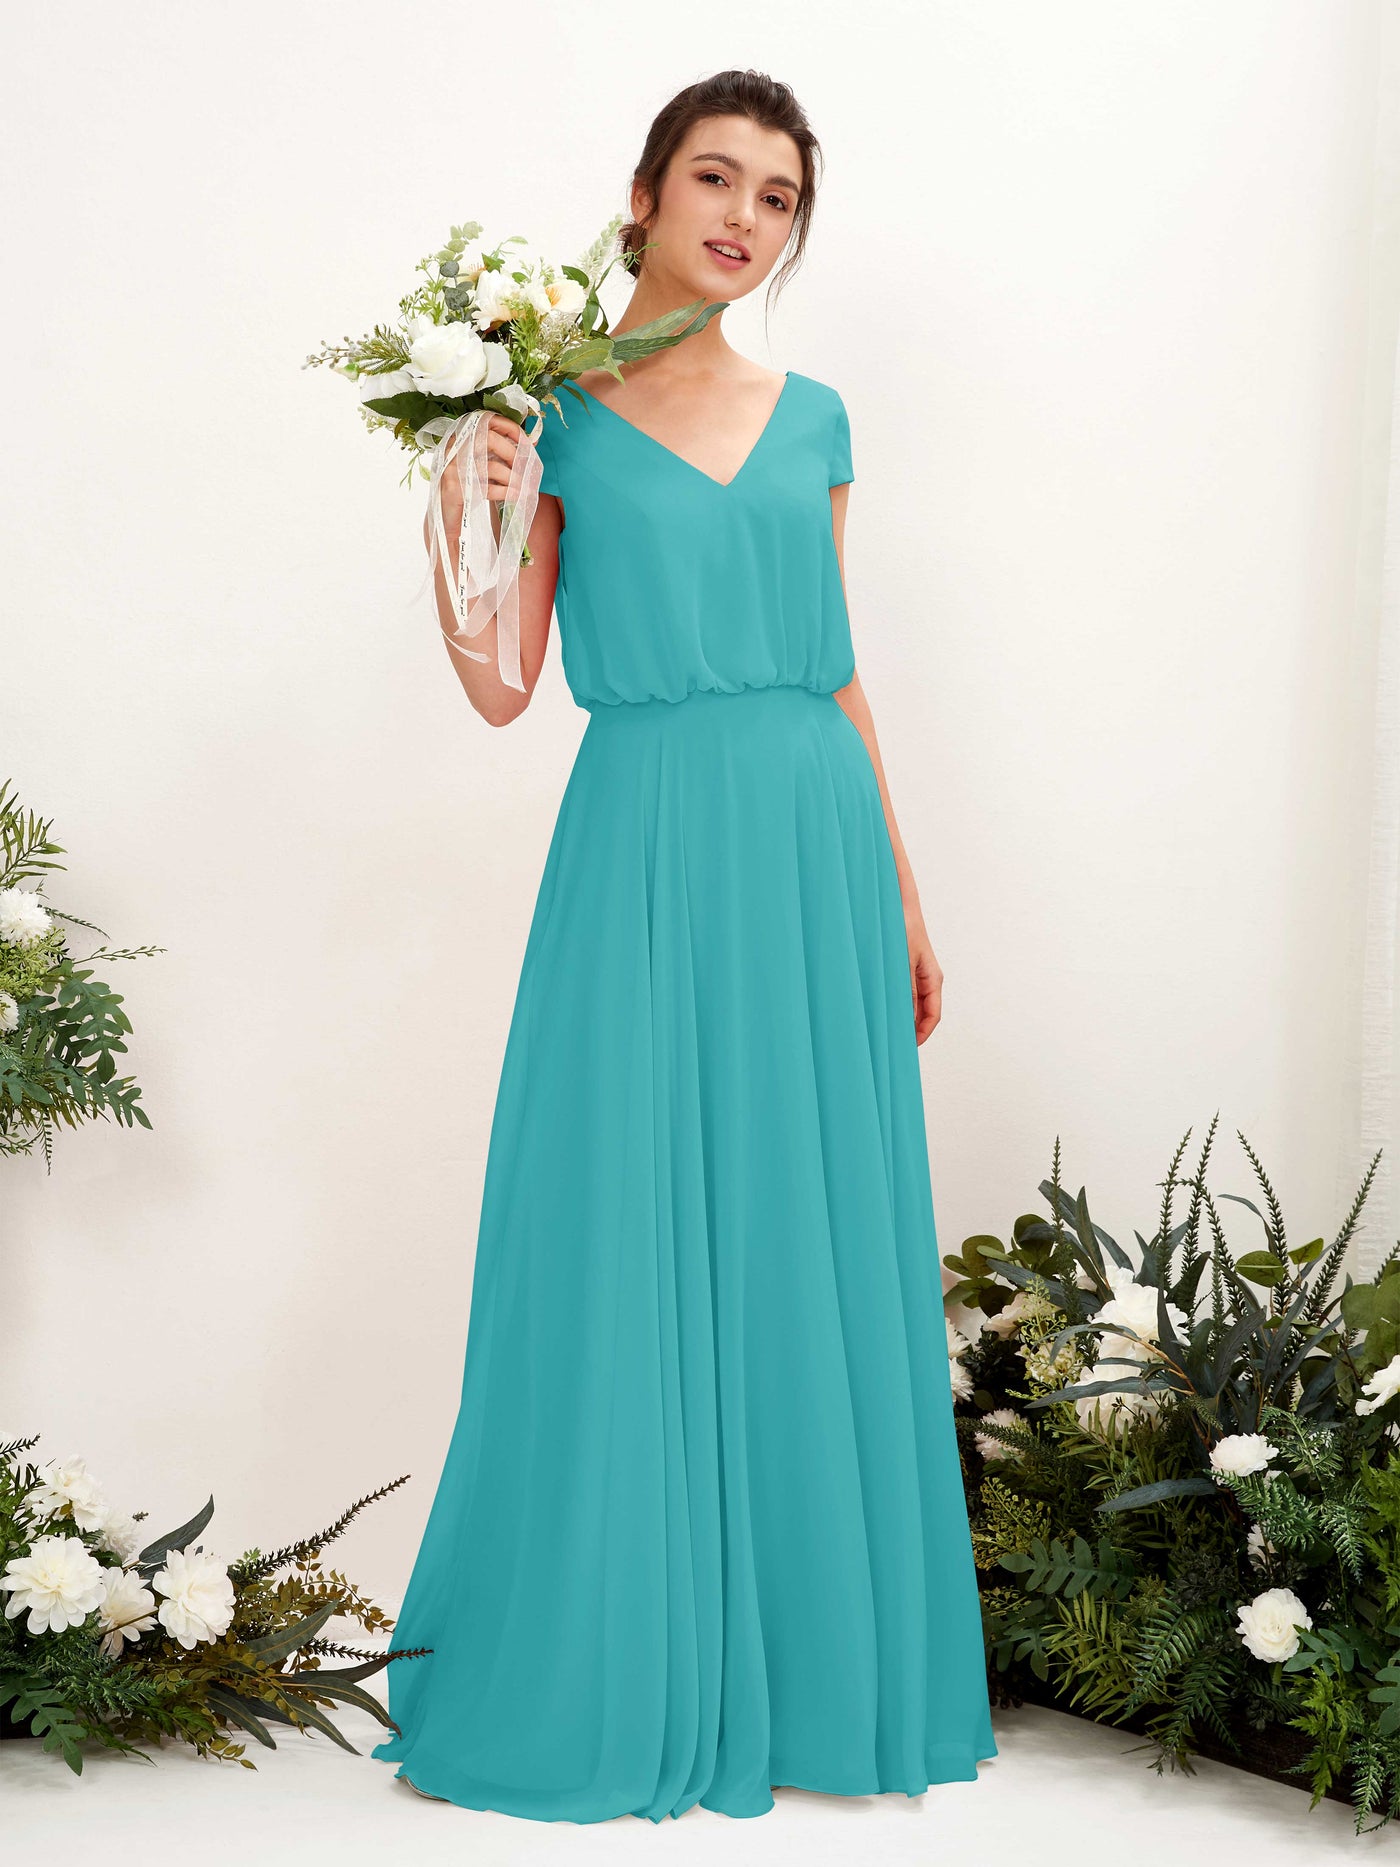 Turquoise Bridesmaid Dresses Bridesmaid Dress A-line Chiffon V-neck Full Length Short Sleeves Wedding Party Dress (81221823)#color_turquoise